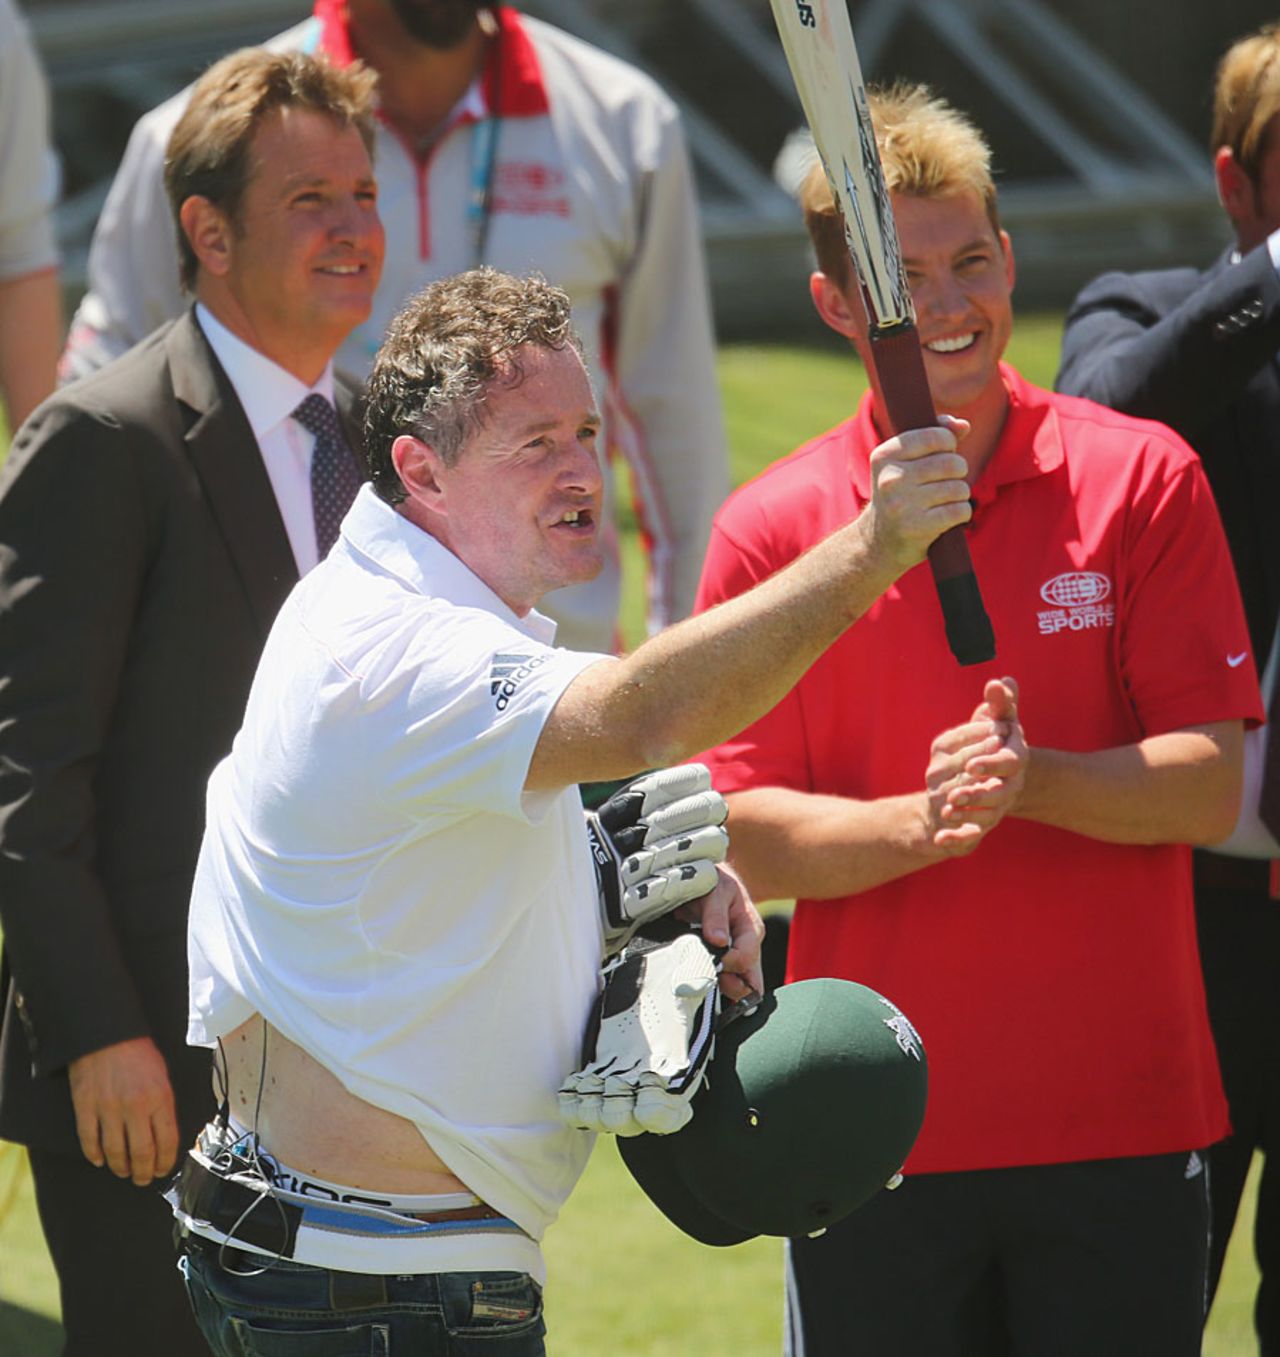 Piers Morgan after facing Brett Lee at the MCG nets, Melbourne, December 27, 2013